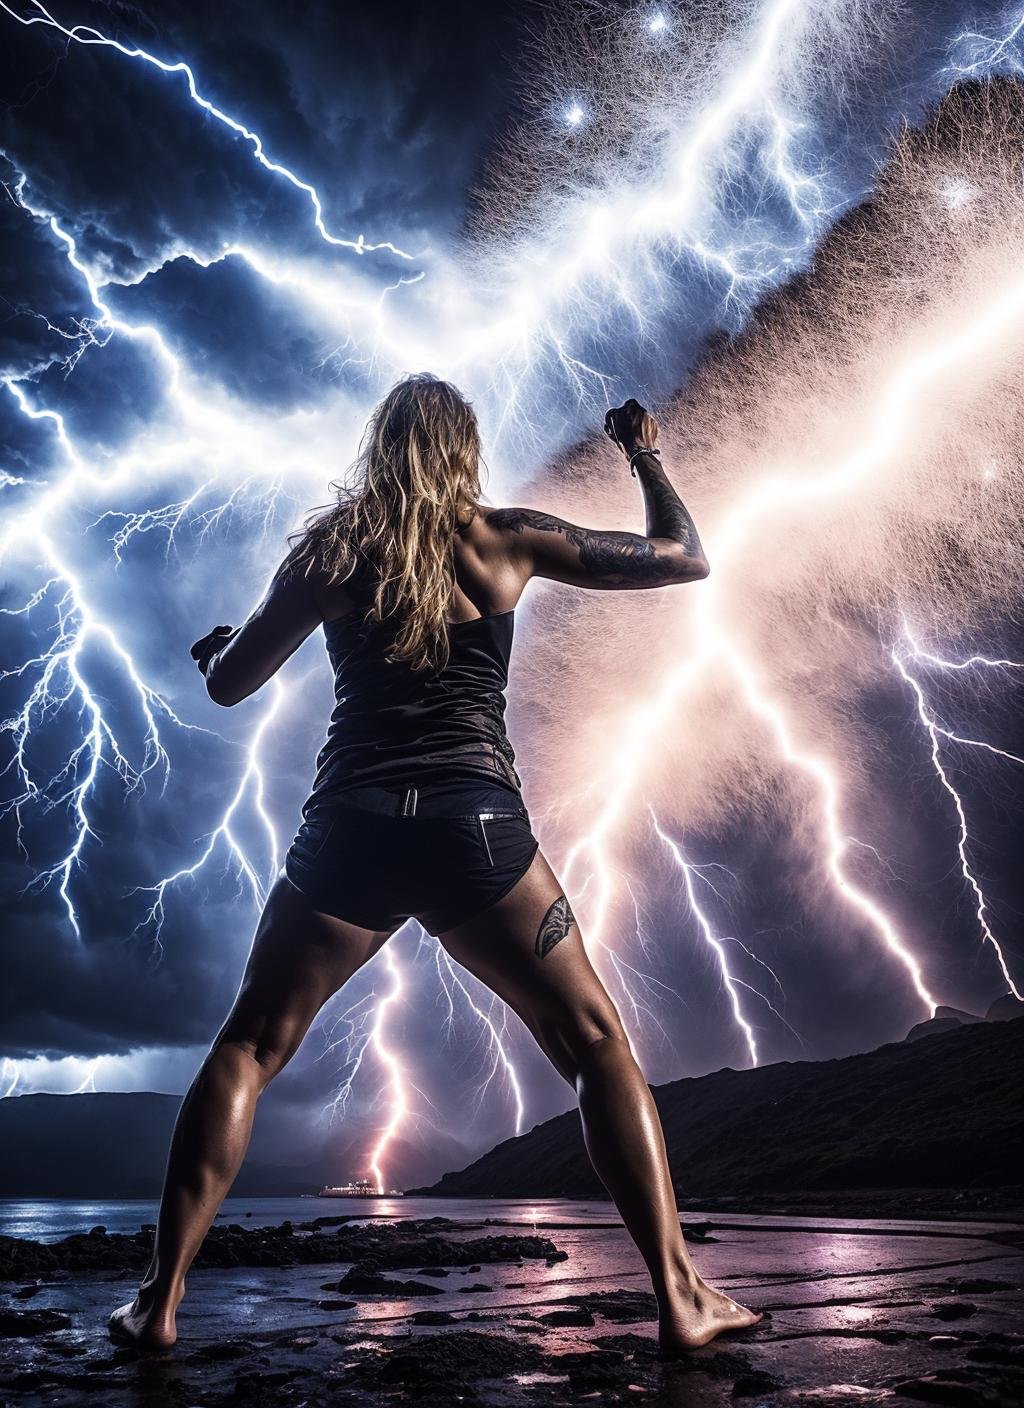 photo of sks woman as electro covered with lightning thunders, ((lightning coming out of body)), ((covered in electricity)), unleashing a powerful lightning attack, lightning bolts surging throughout  <lora:locon_conceptlightning_v1_from_v1_64_32:1> lghtnngprsn, natural lighting,  by Jimmy Nelson<lora:locon_anetanewer_v2_from_v2_64_32:0.4> <lora:locon_newer_v2_from_v2_64_32:0.4> <lora:locon_neweraneta_v1_from_v1_64_32:0.4> <lora:lora-f000f-aneta:0.4>, <lora:add_detail:0.7>cinematic, intricate details, 32K, UHD, HDR, ultra-realism, action background (heavy damage and debris), ultra-detailed, 32k, intricate, cinematic composition, IMAX, stunning image, trending, amazing art, cinematic color grade, dramatic lighting(lightning), electrical surges through the body, covered in electricity